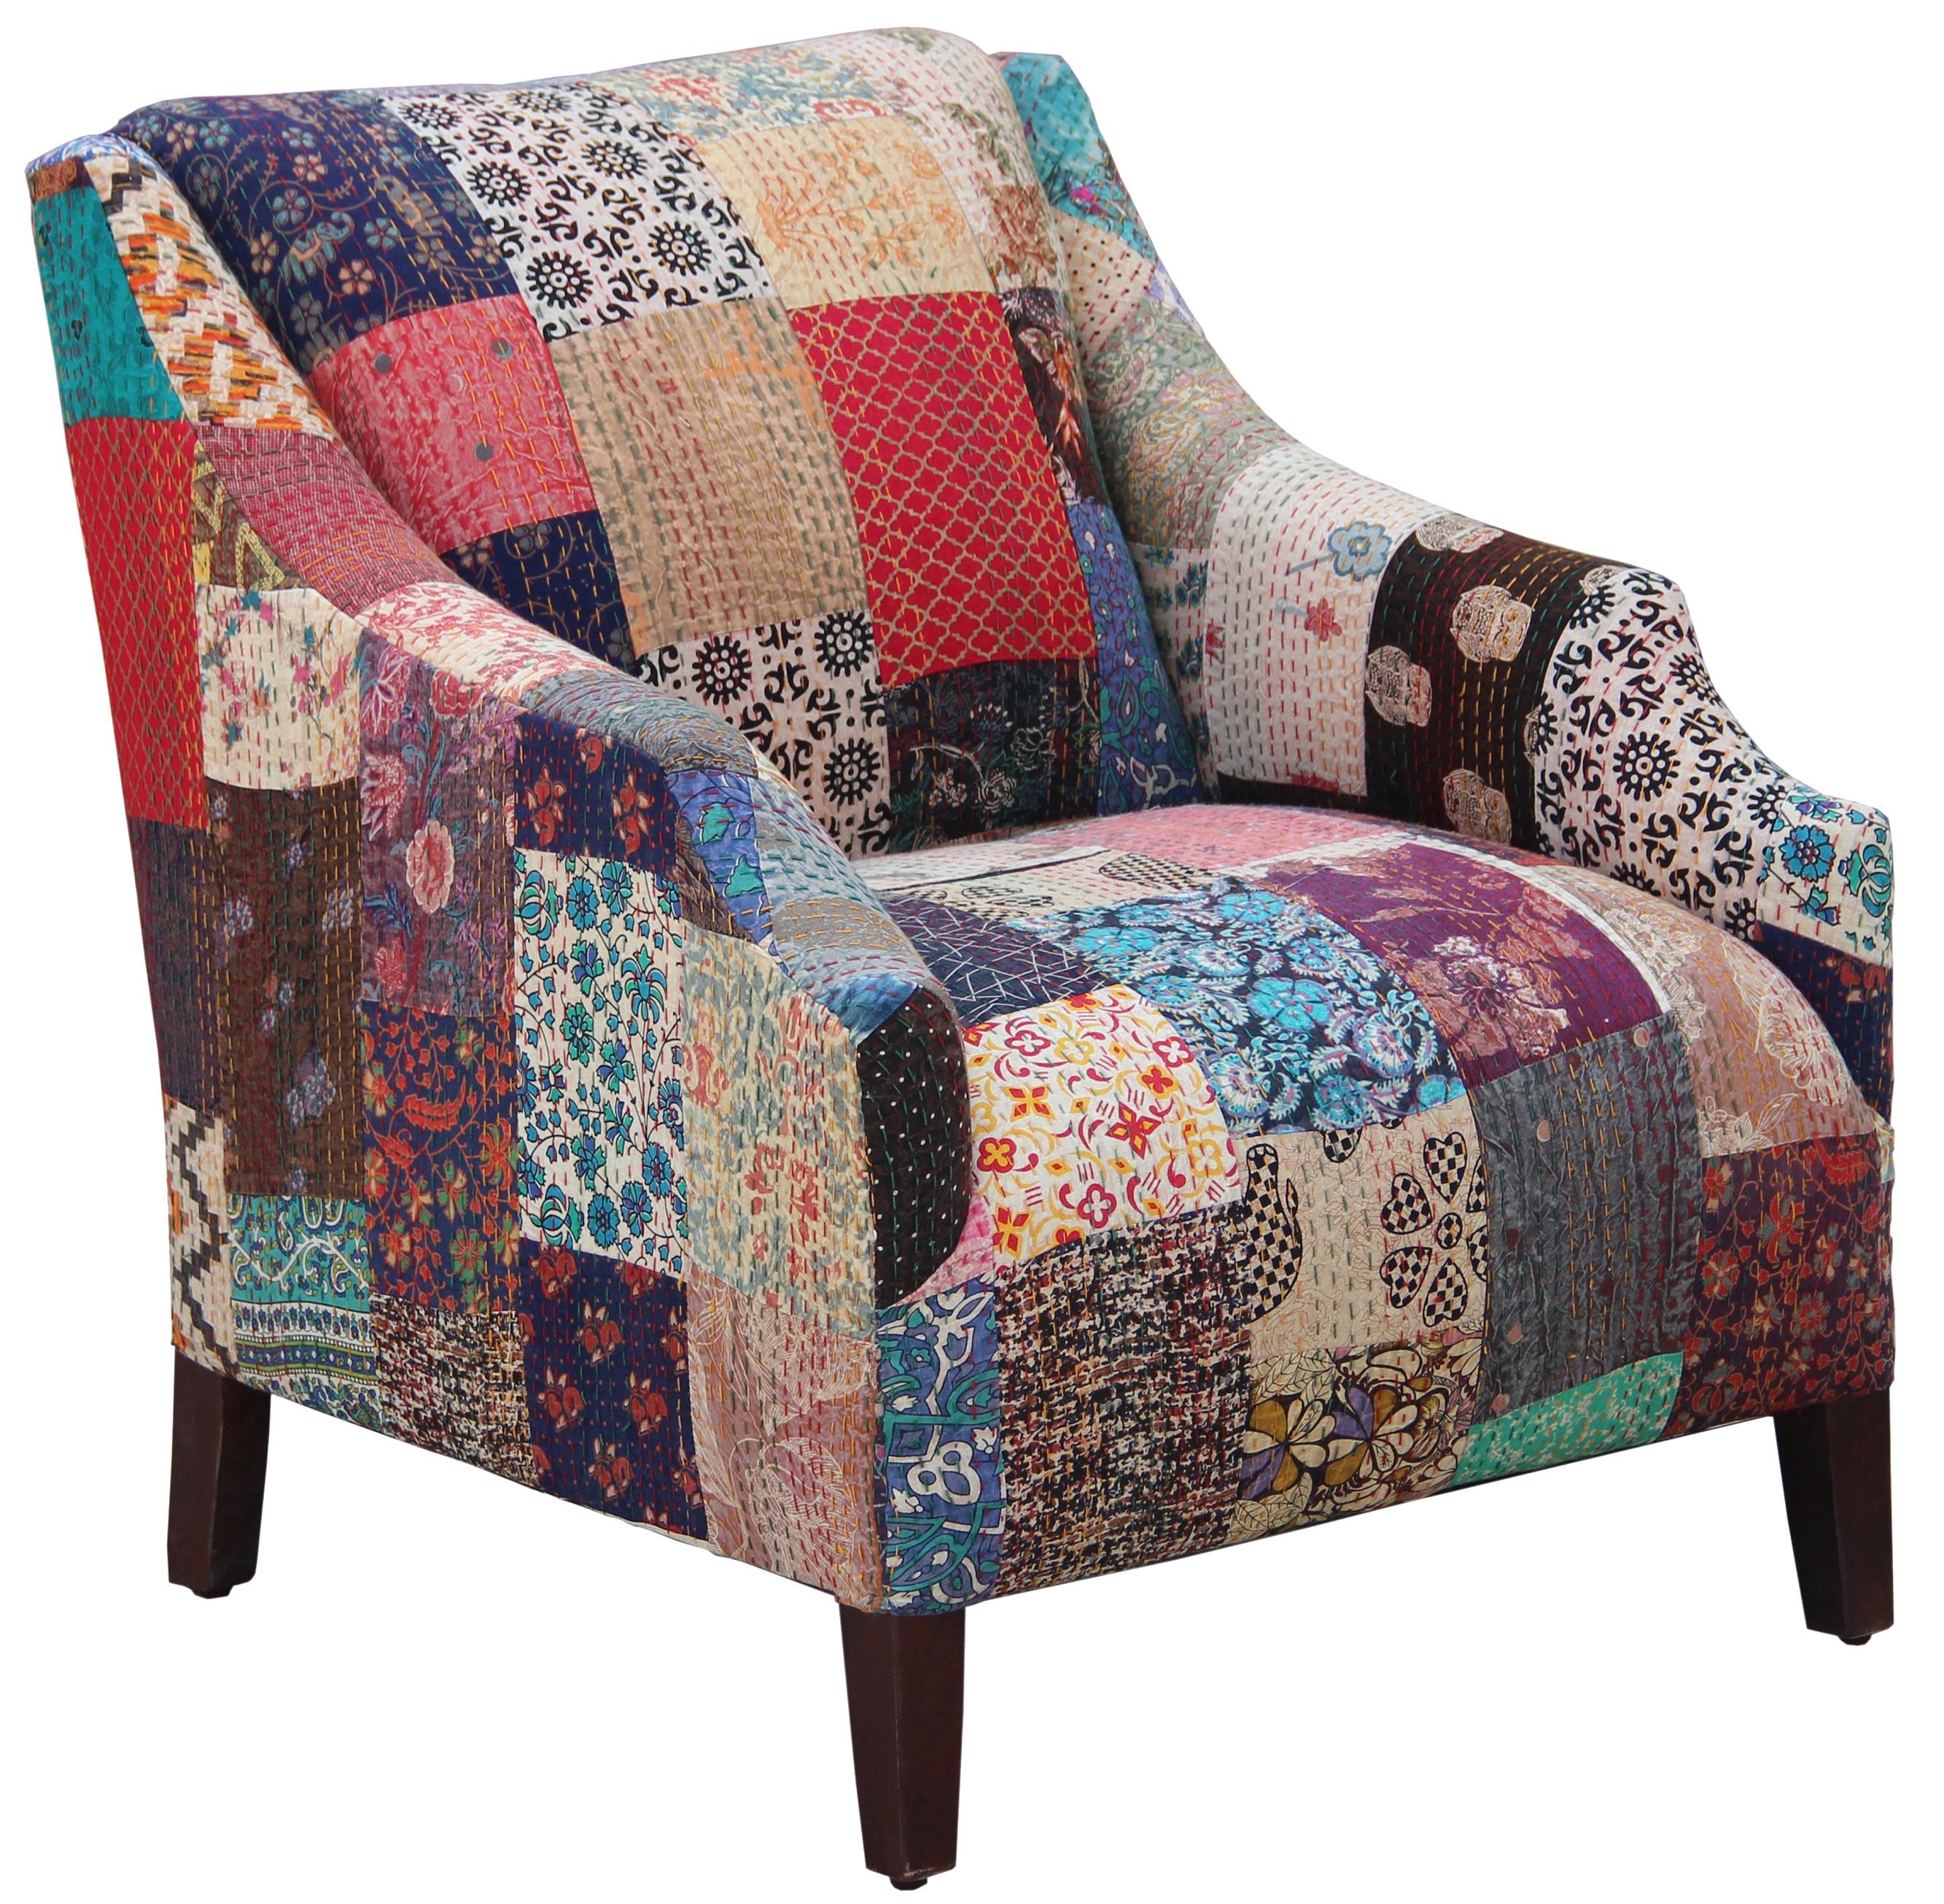 Transitional Chair CAC-5292 Cadence CAC-5292 in Multi-Color Patterned Cotton